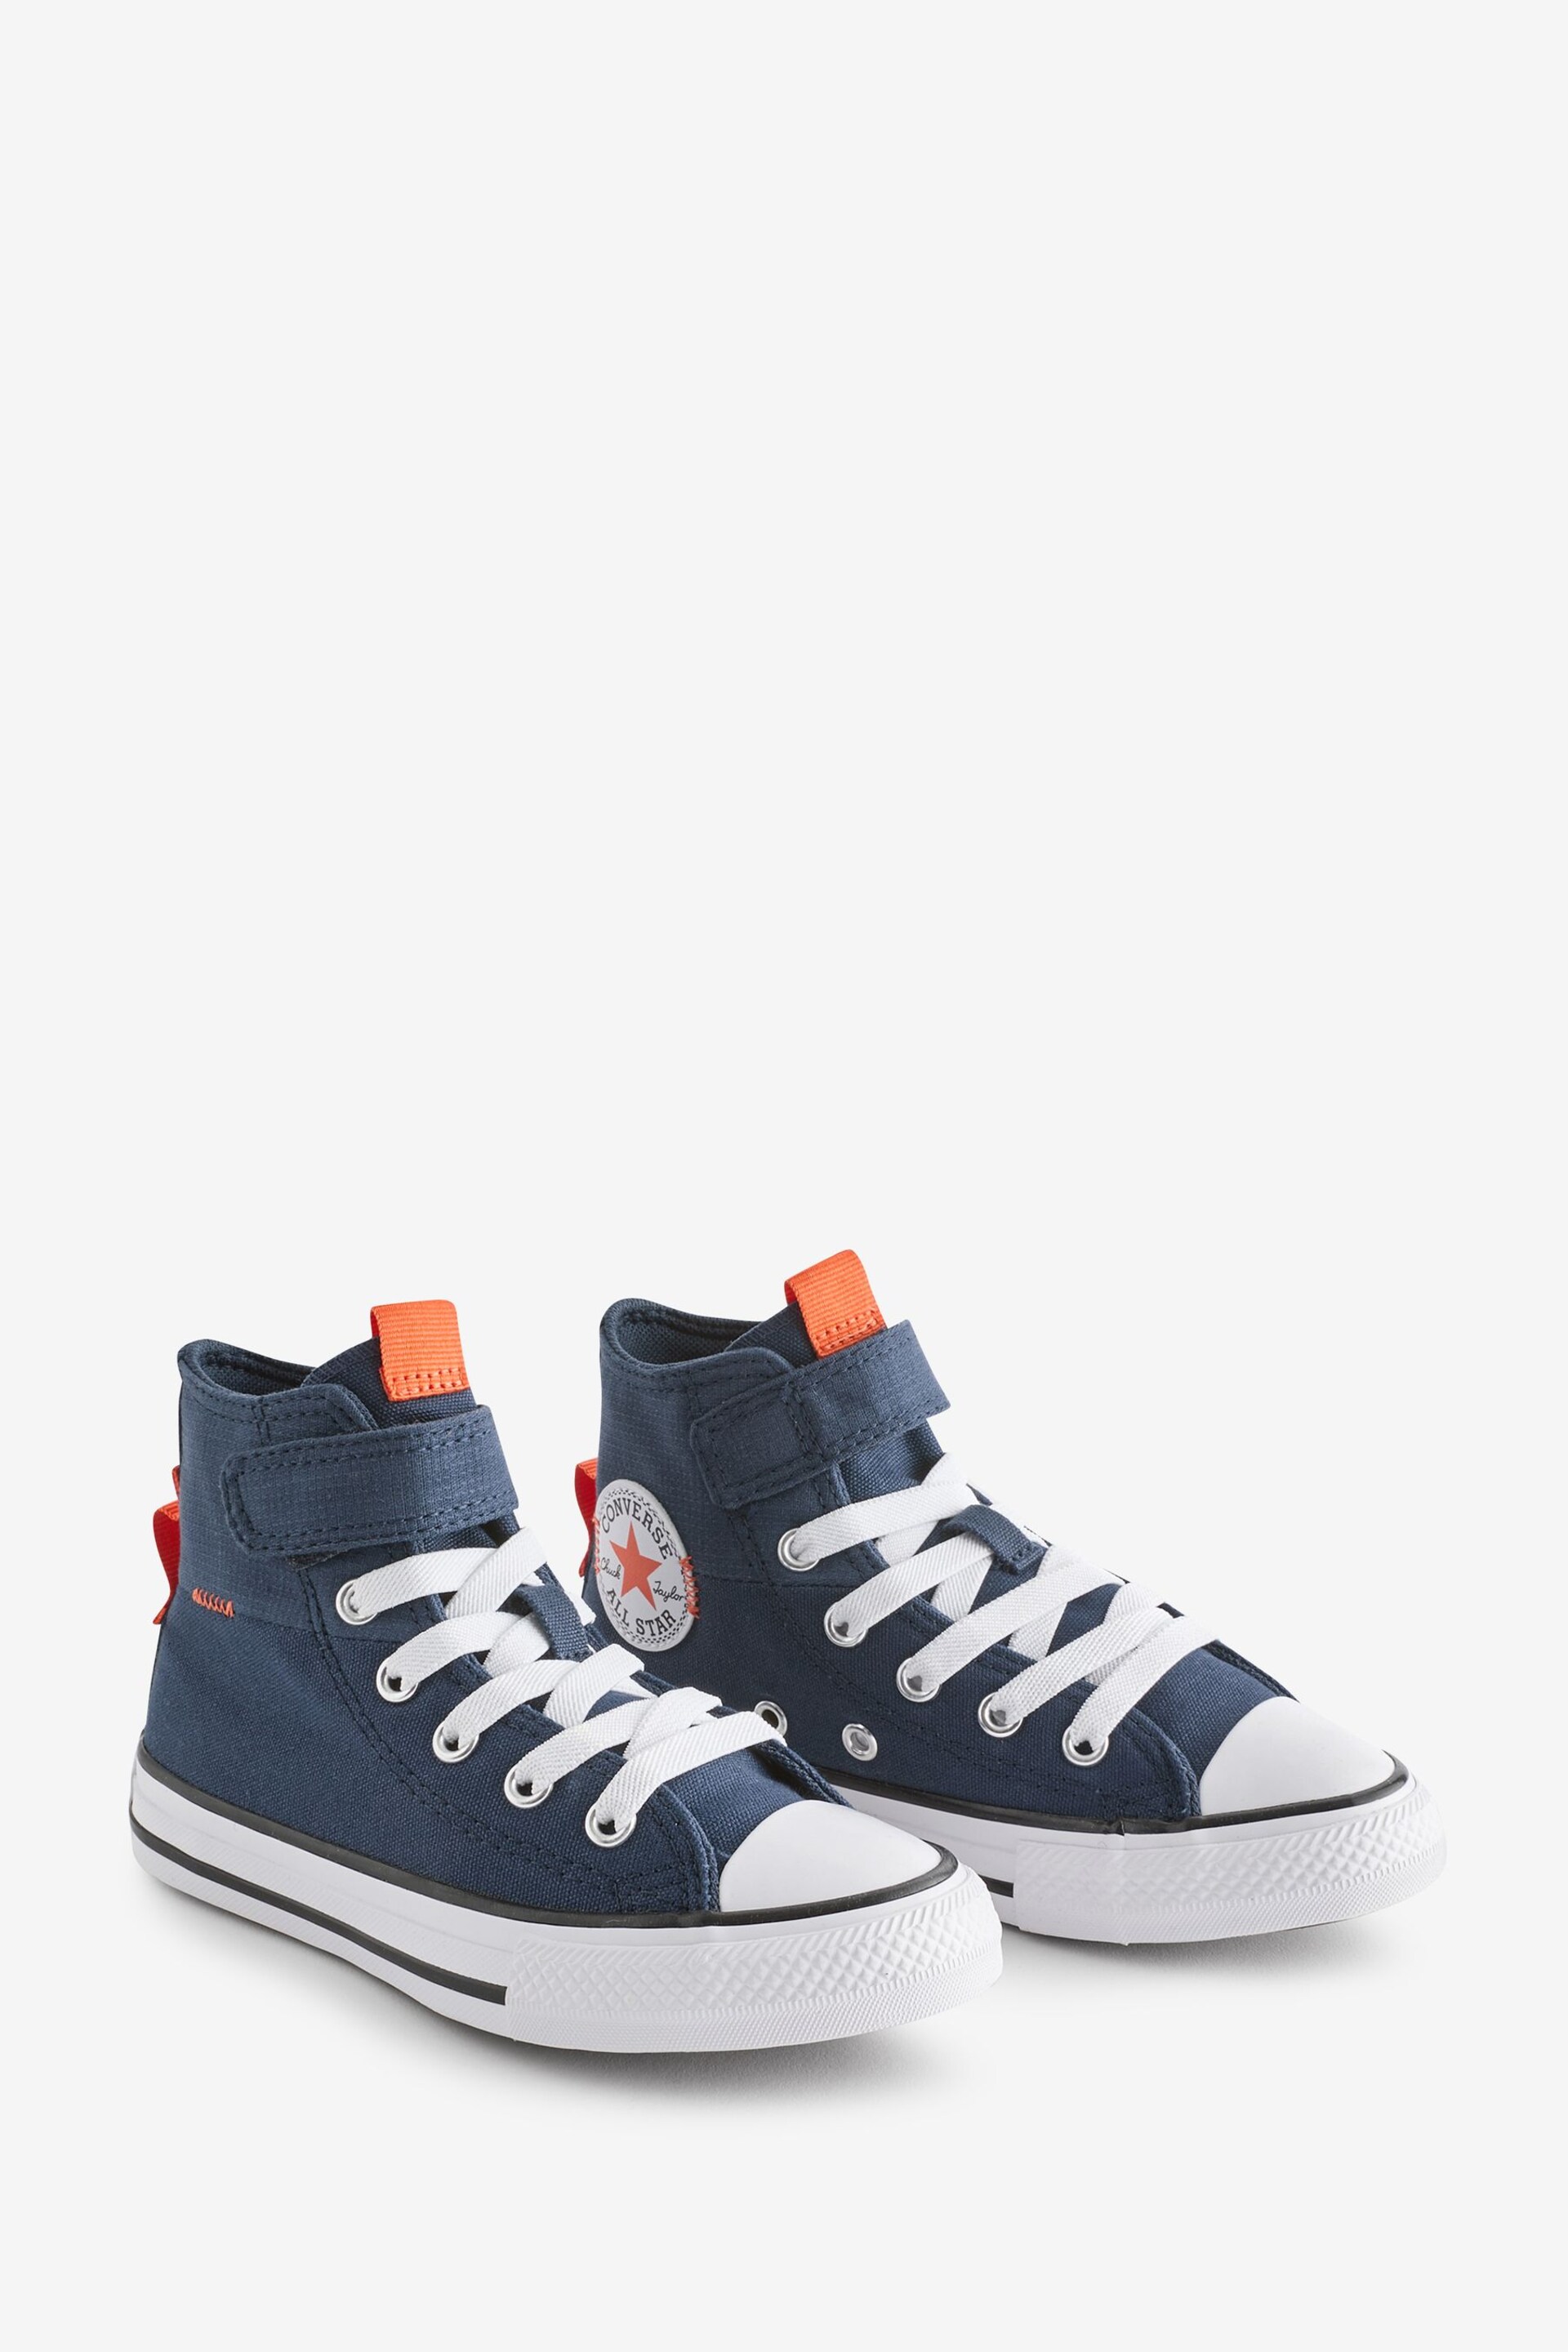 Converse Navy Chuck Taylor All Star 1V Junior Trainers - Image 3 of 9